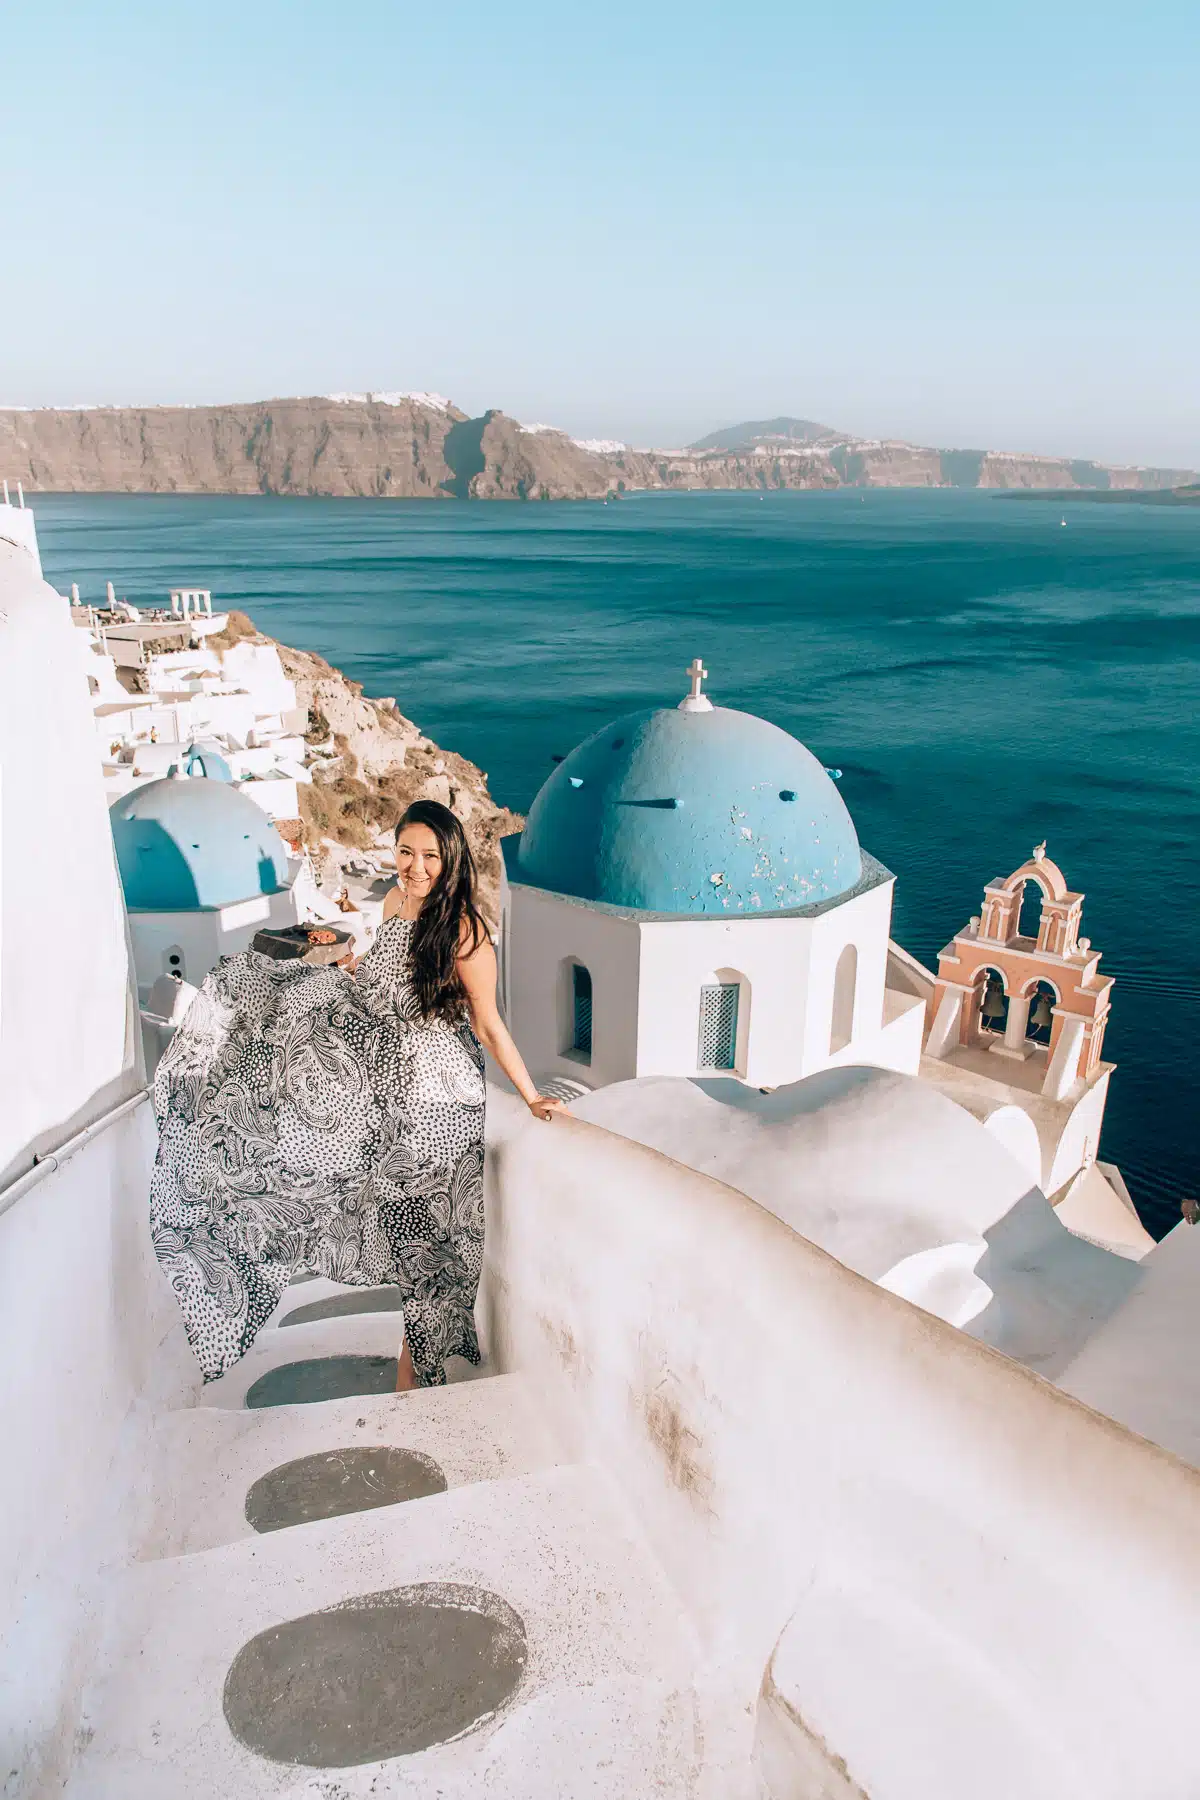 Top 20 Santorini Instagram spots, by travel blogger What The Fab